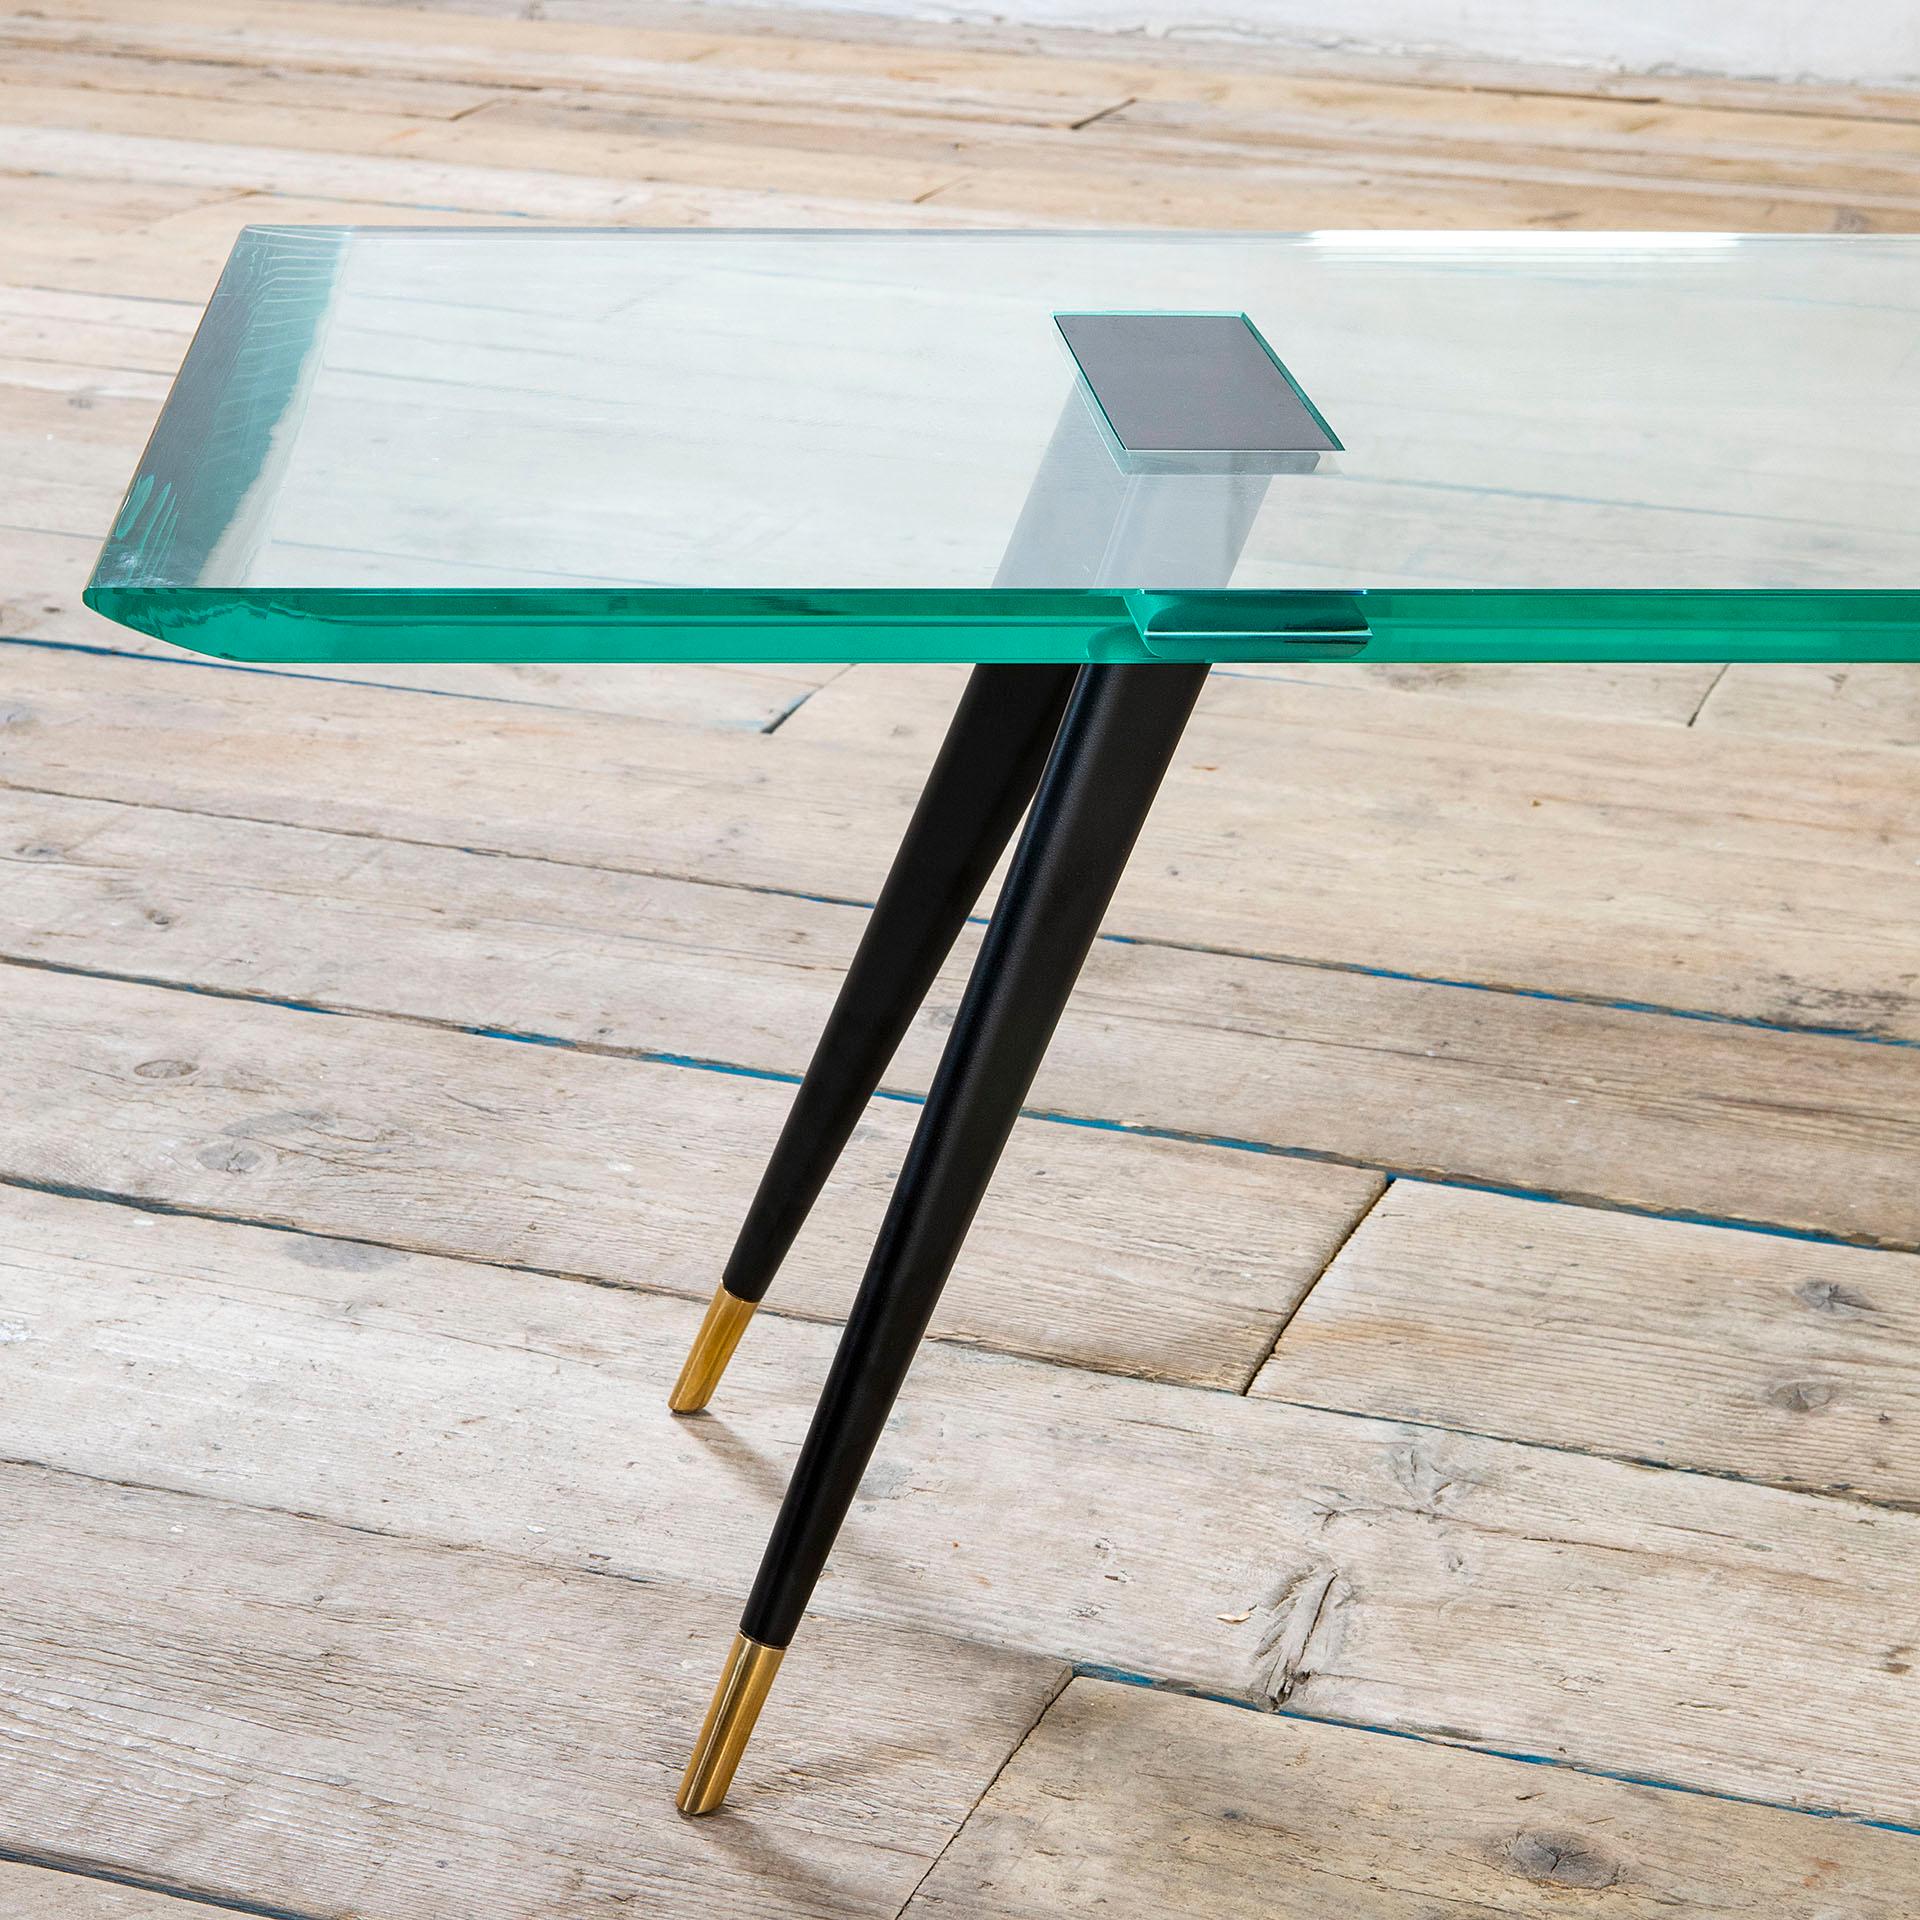 Italian 20th Century Max Ingrand Fontana Arte Low Table mod. 1817/1 Brass and Glass, 50s For Sale